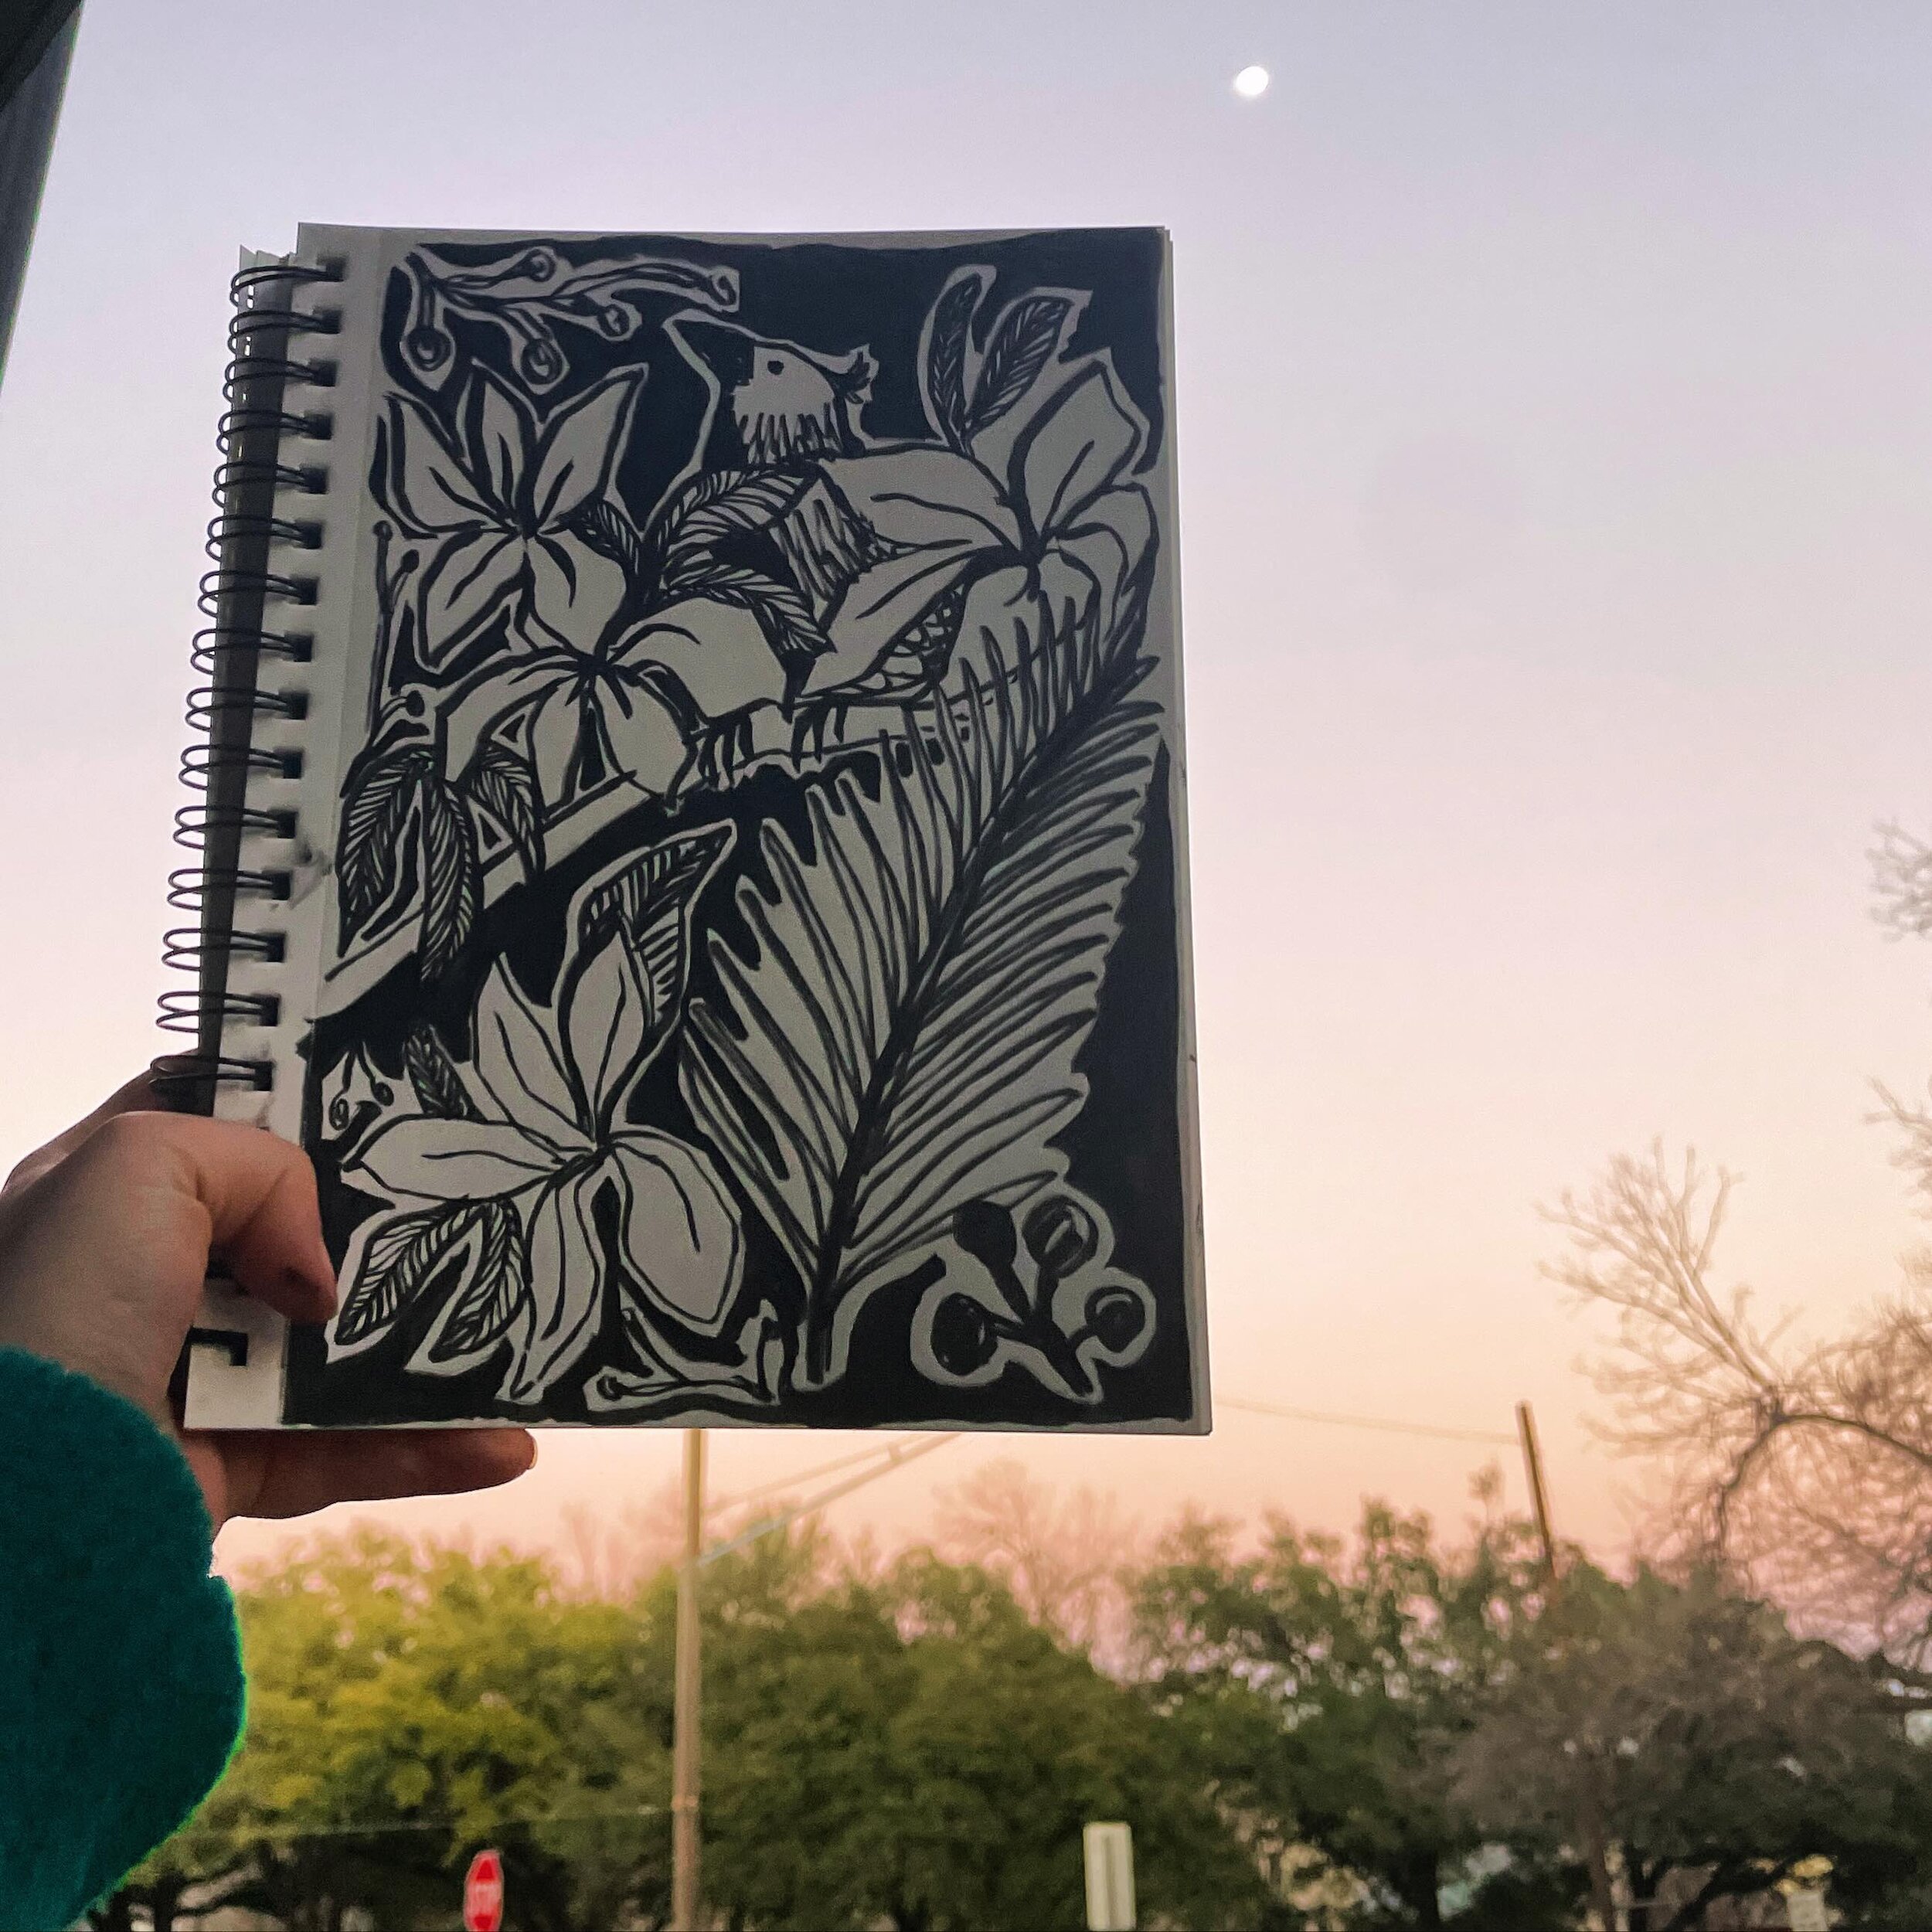 Day 3 🌅 pretty sky this evening served as the perfect backdrop to today&rsquo;s drawing. Feels kinda tropical 🦜
.
.
.
.
.
#100dayproject #birddrawing #tropicalplants #illustration